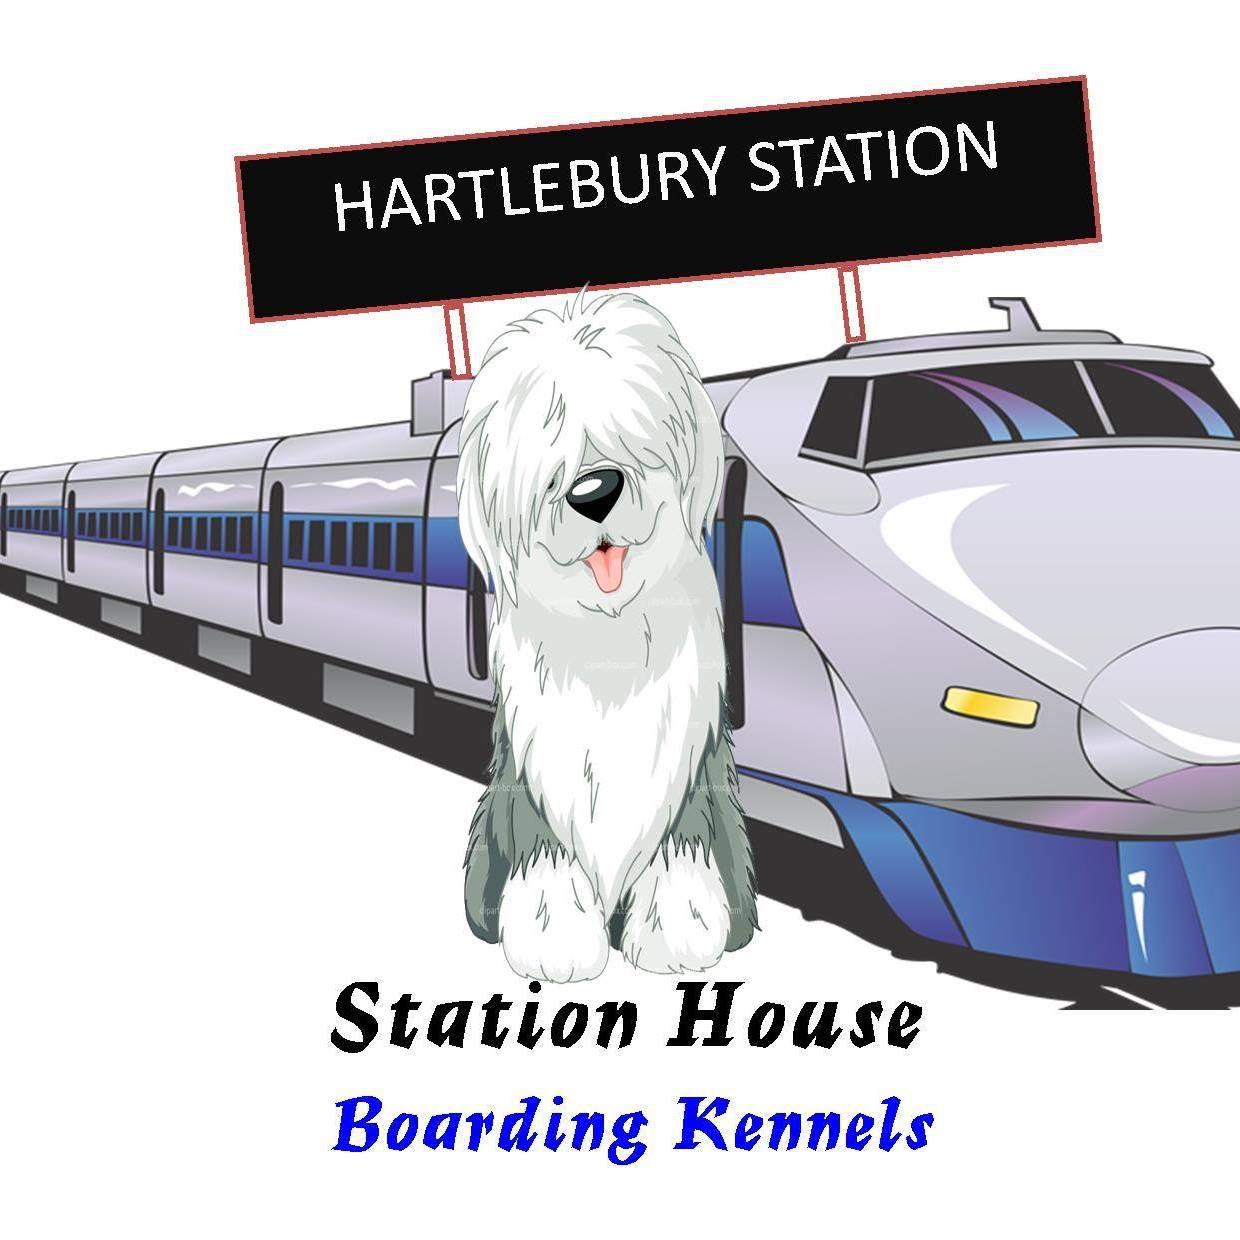 Station House Boarding Kennels - Kidderminster, Worcestershire DY10 4HA - 01299 250995 | ShowMeLocal.com